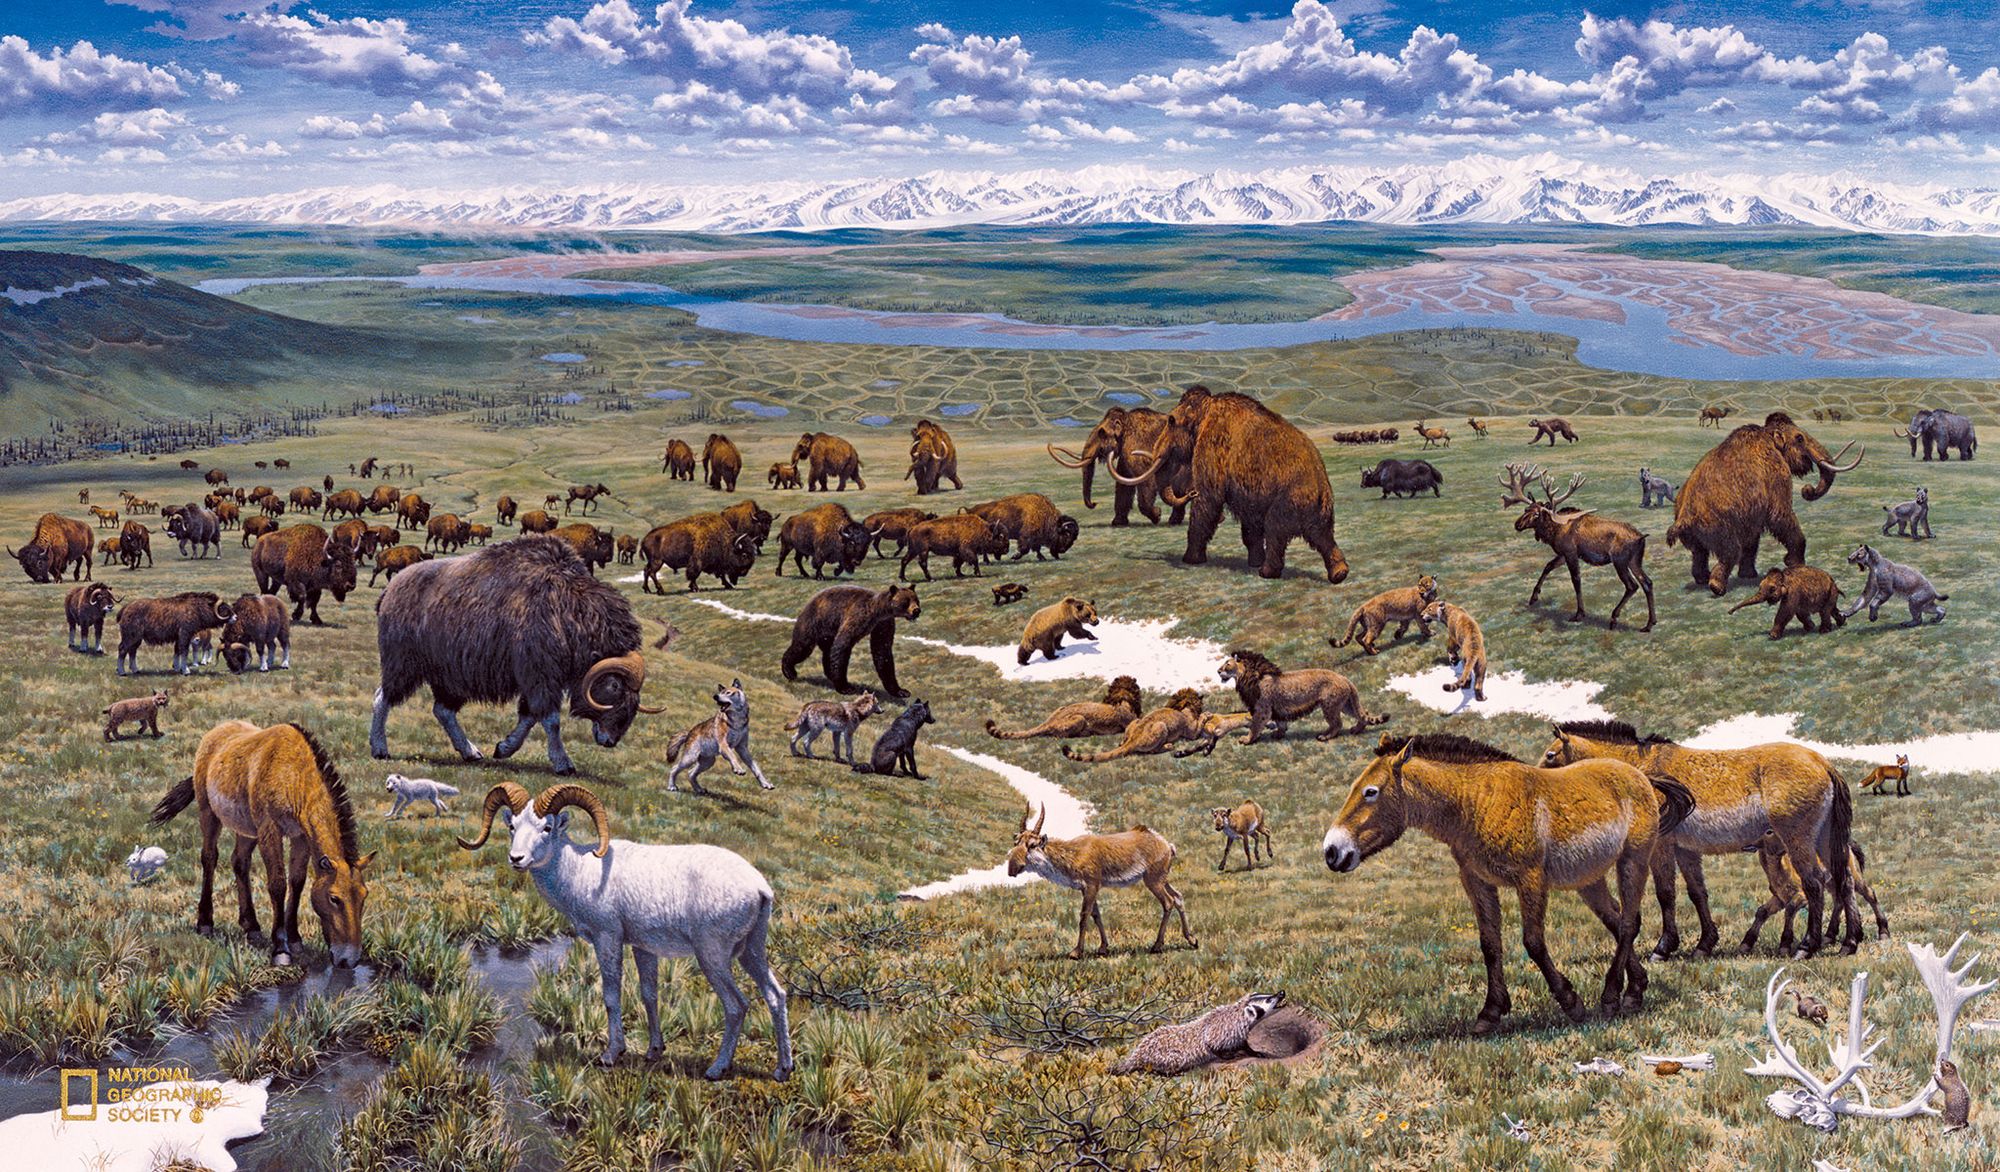 Animals gathered together on a steppe.